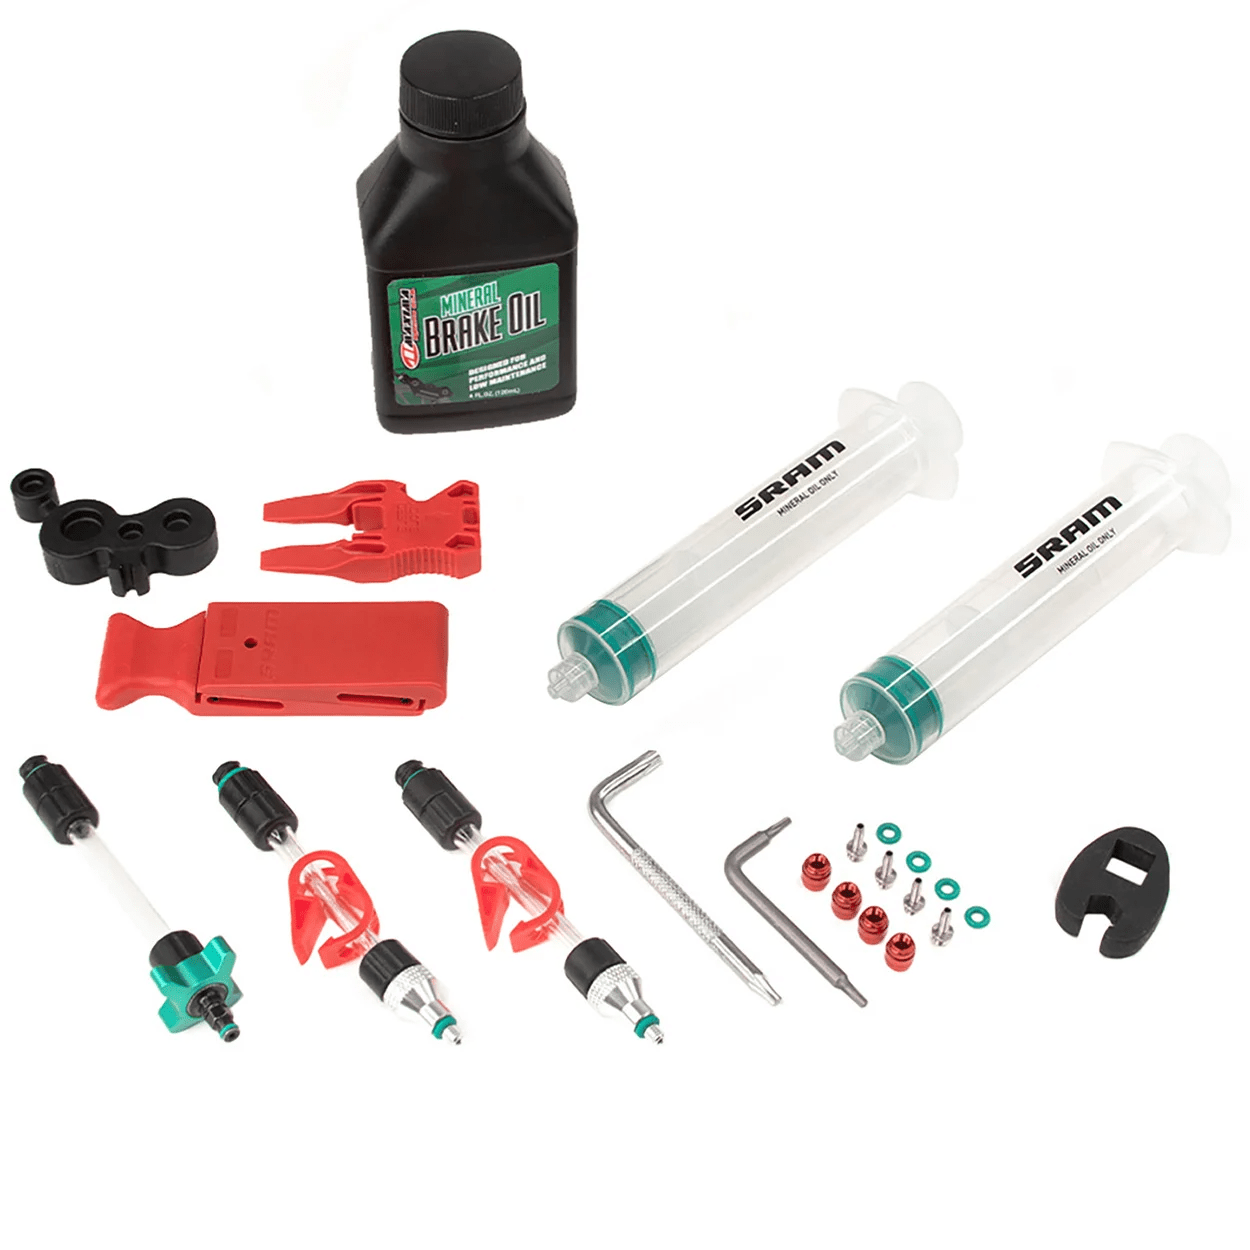 SRAM Mineral Oil Bleed Kit V2 with Oil Accessories - Maintenance - Bleed Kits